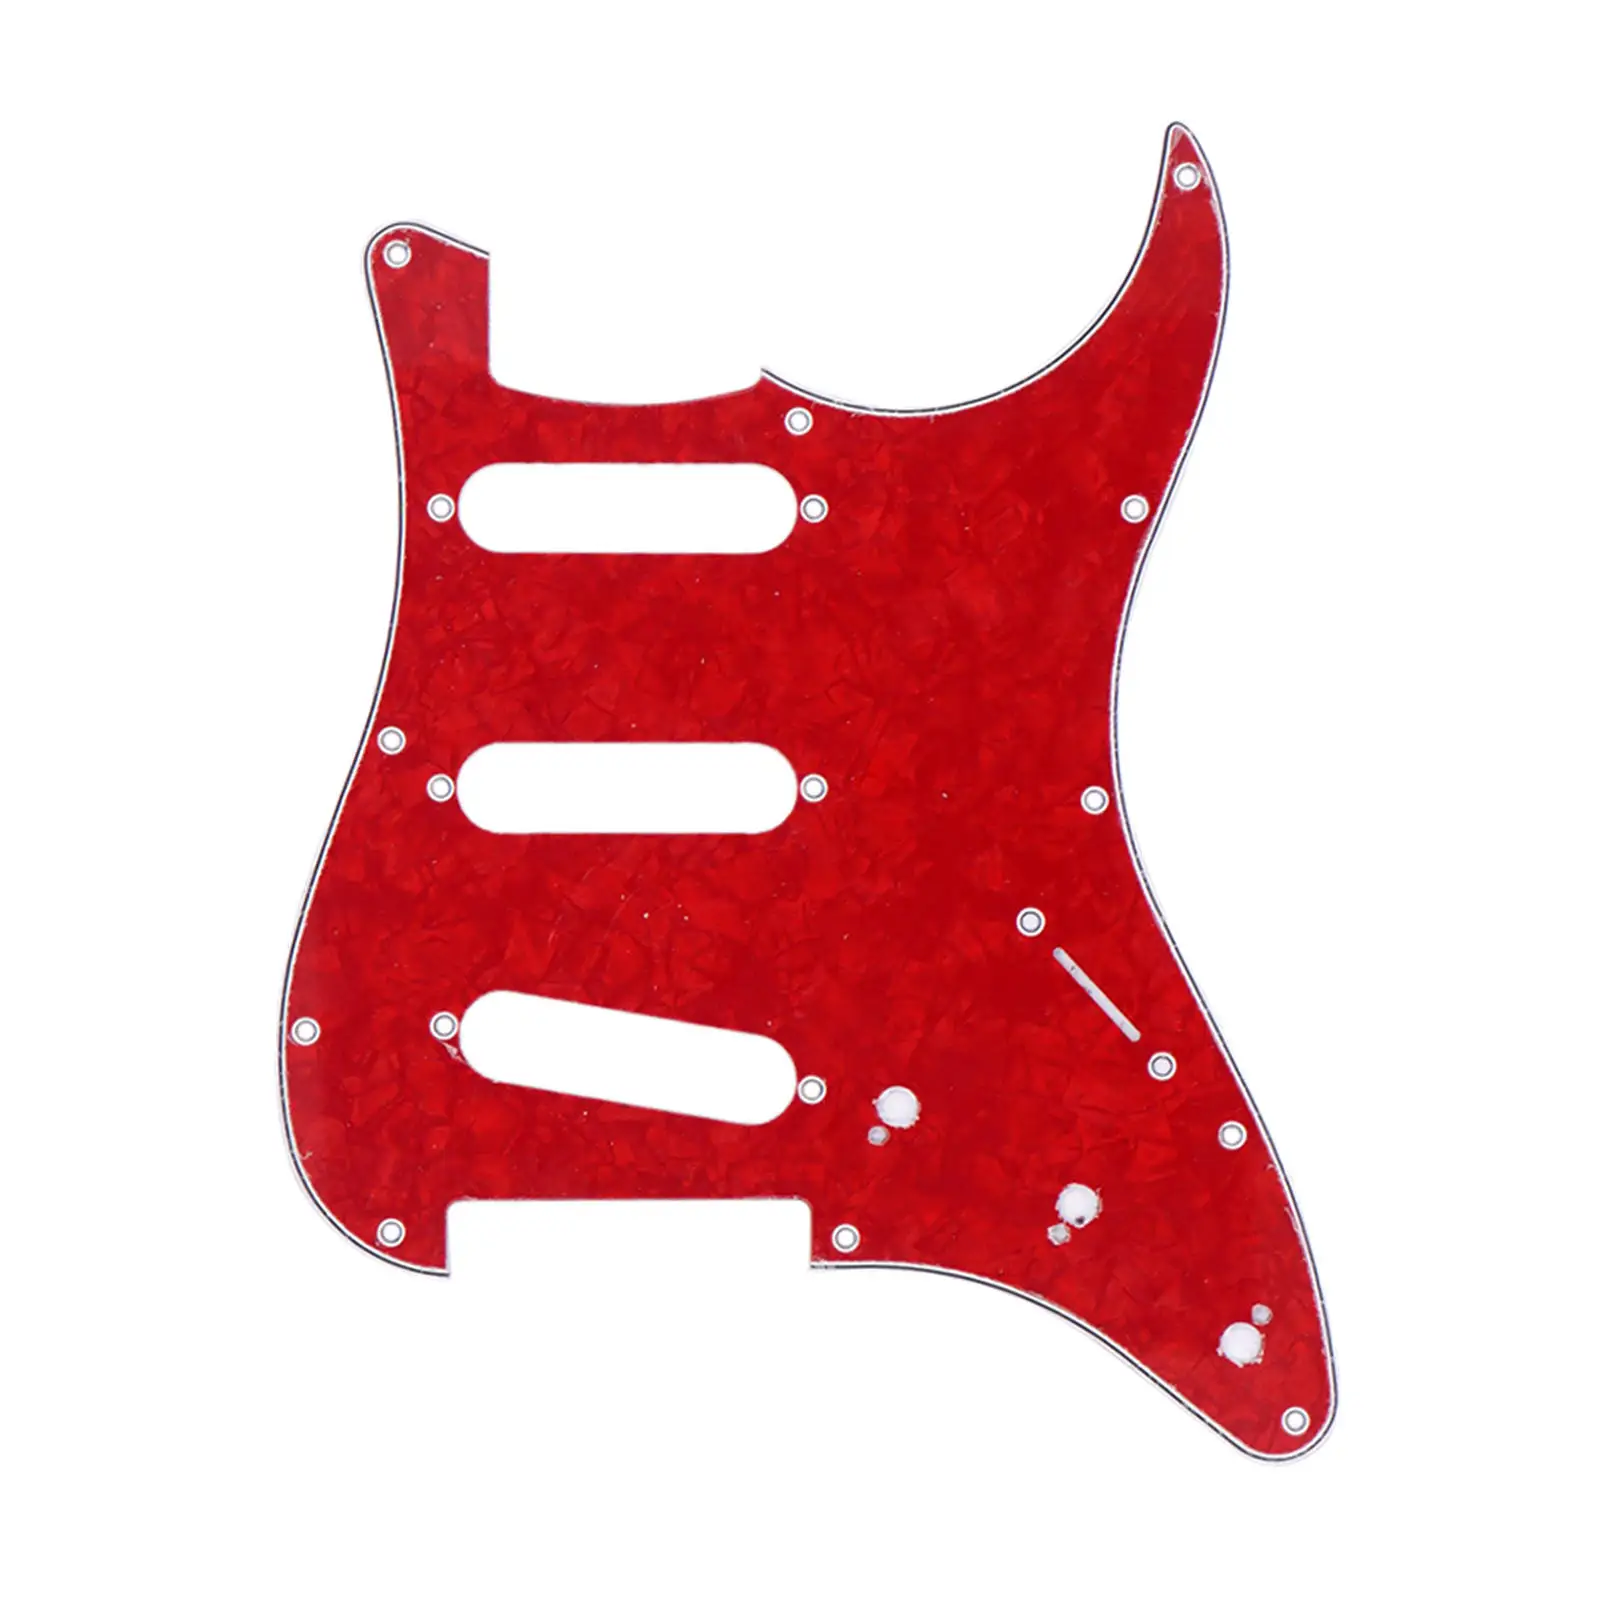 11 Hole ST SQ SSS Single Coil Pickups Guitar Pickguard Scratch Plate without Screws for SUSA/Mexican Made Guitar Stratocaster